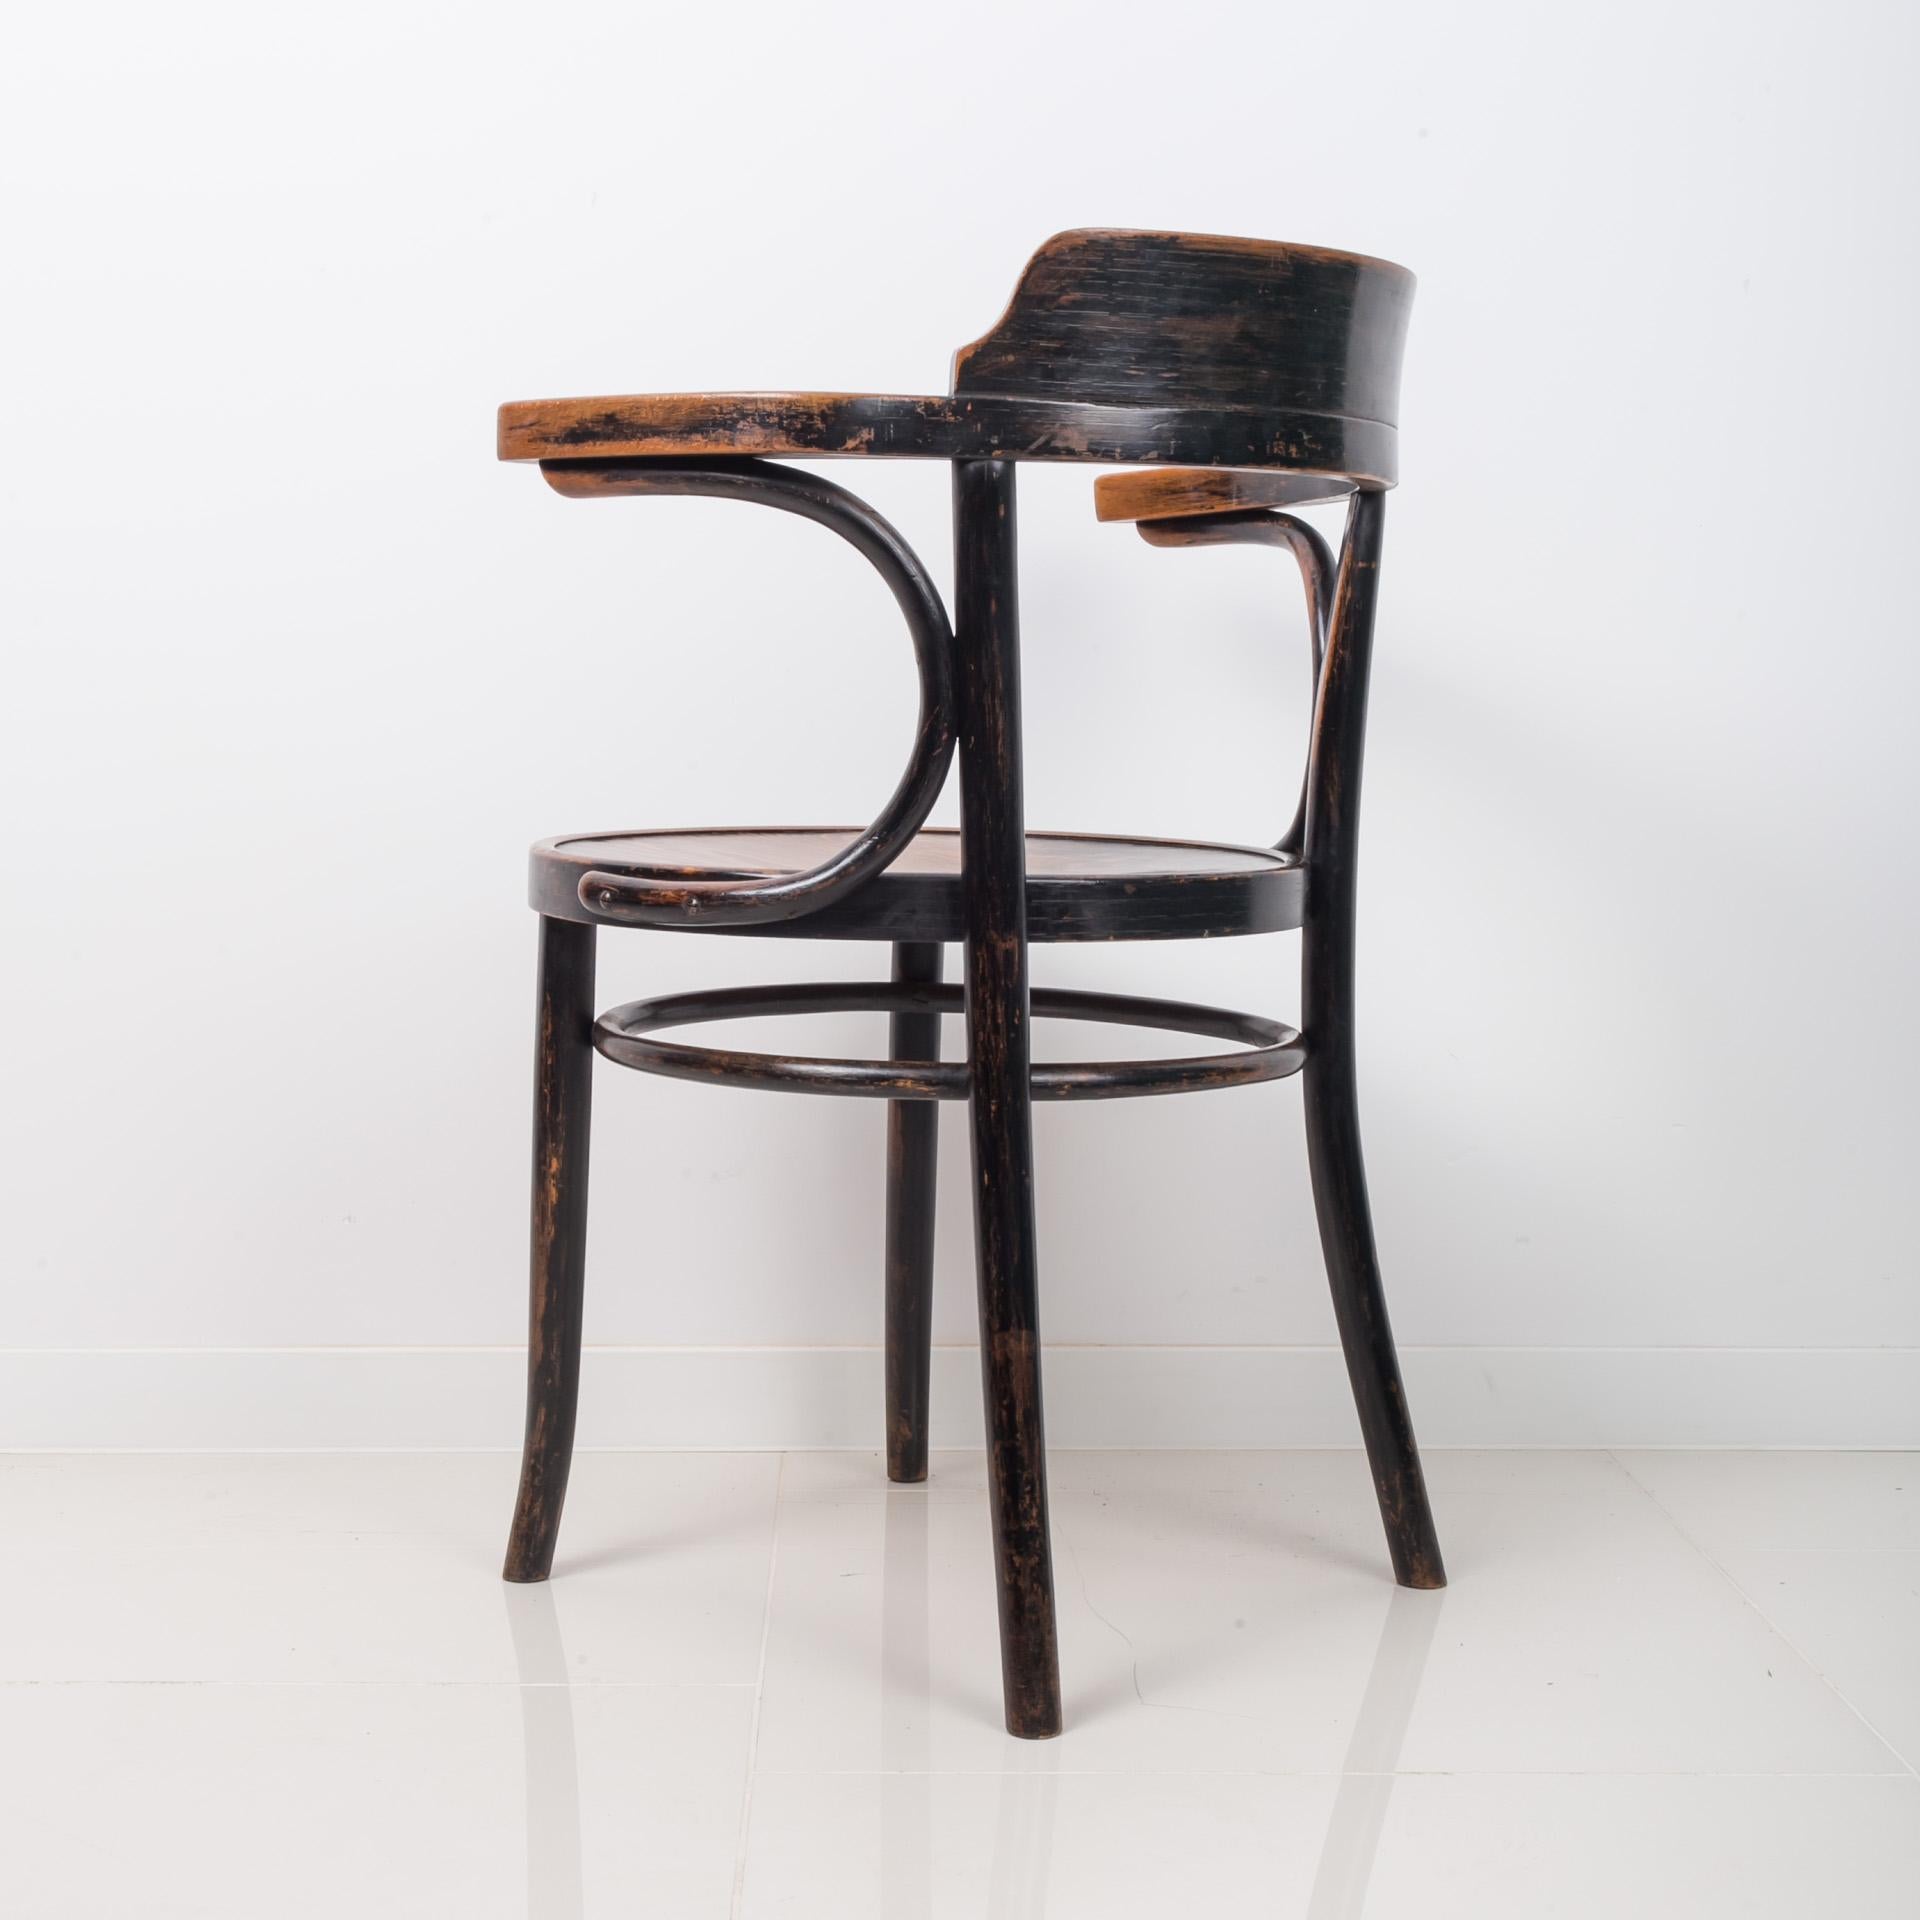 Early 20th Century Iconic Thonet Chair Designed by M. Thonet, Bentwood, 1920s